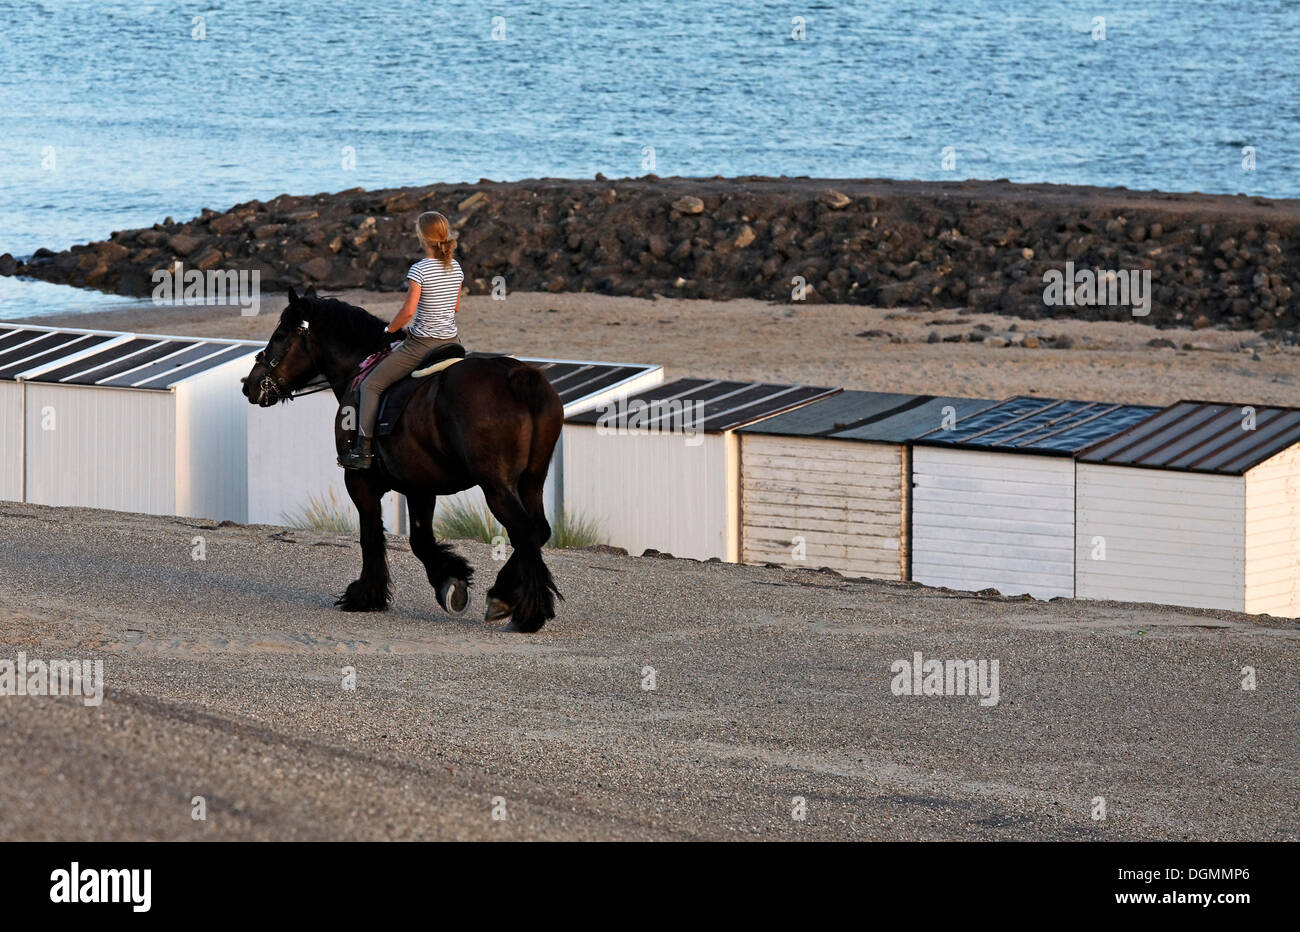 Young woman riding a heavy horse in front of white beach huts, Westkapelle, Walcheren peninsula, Zeeland province, Netherlands Stock Photo